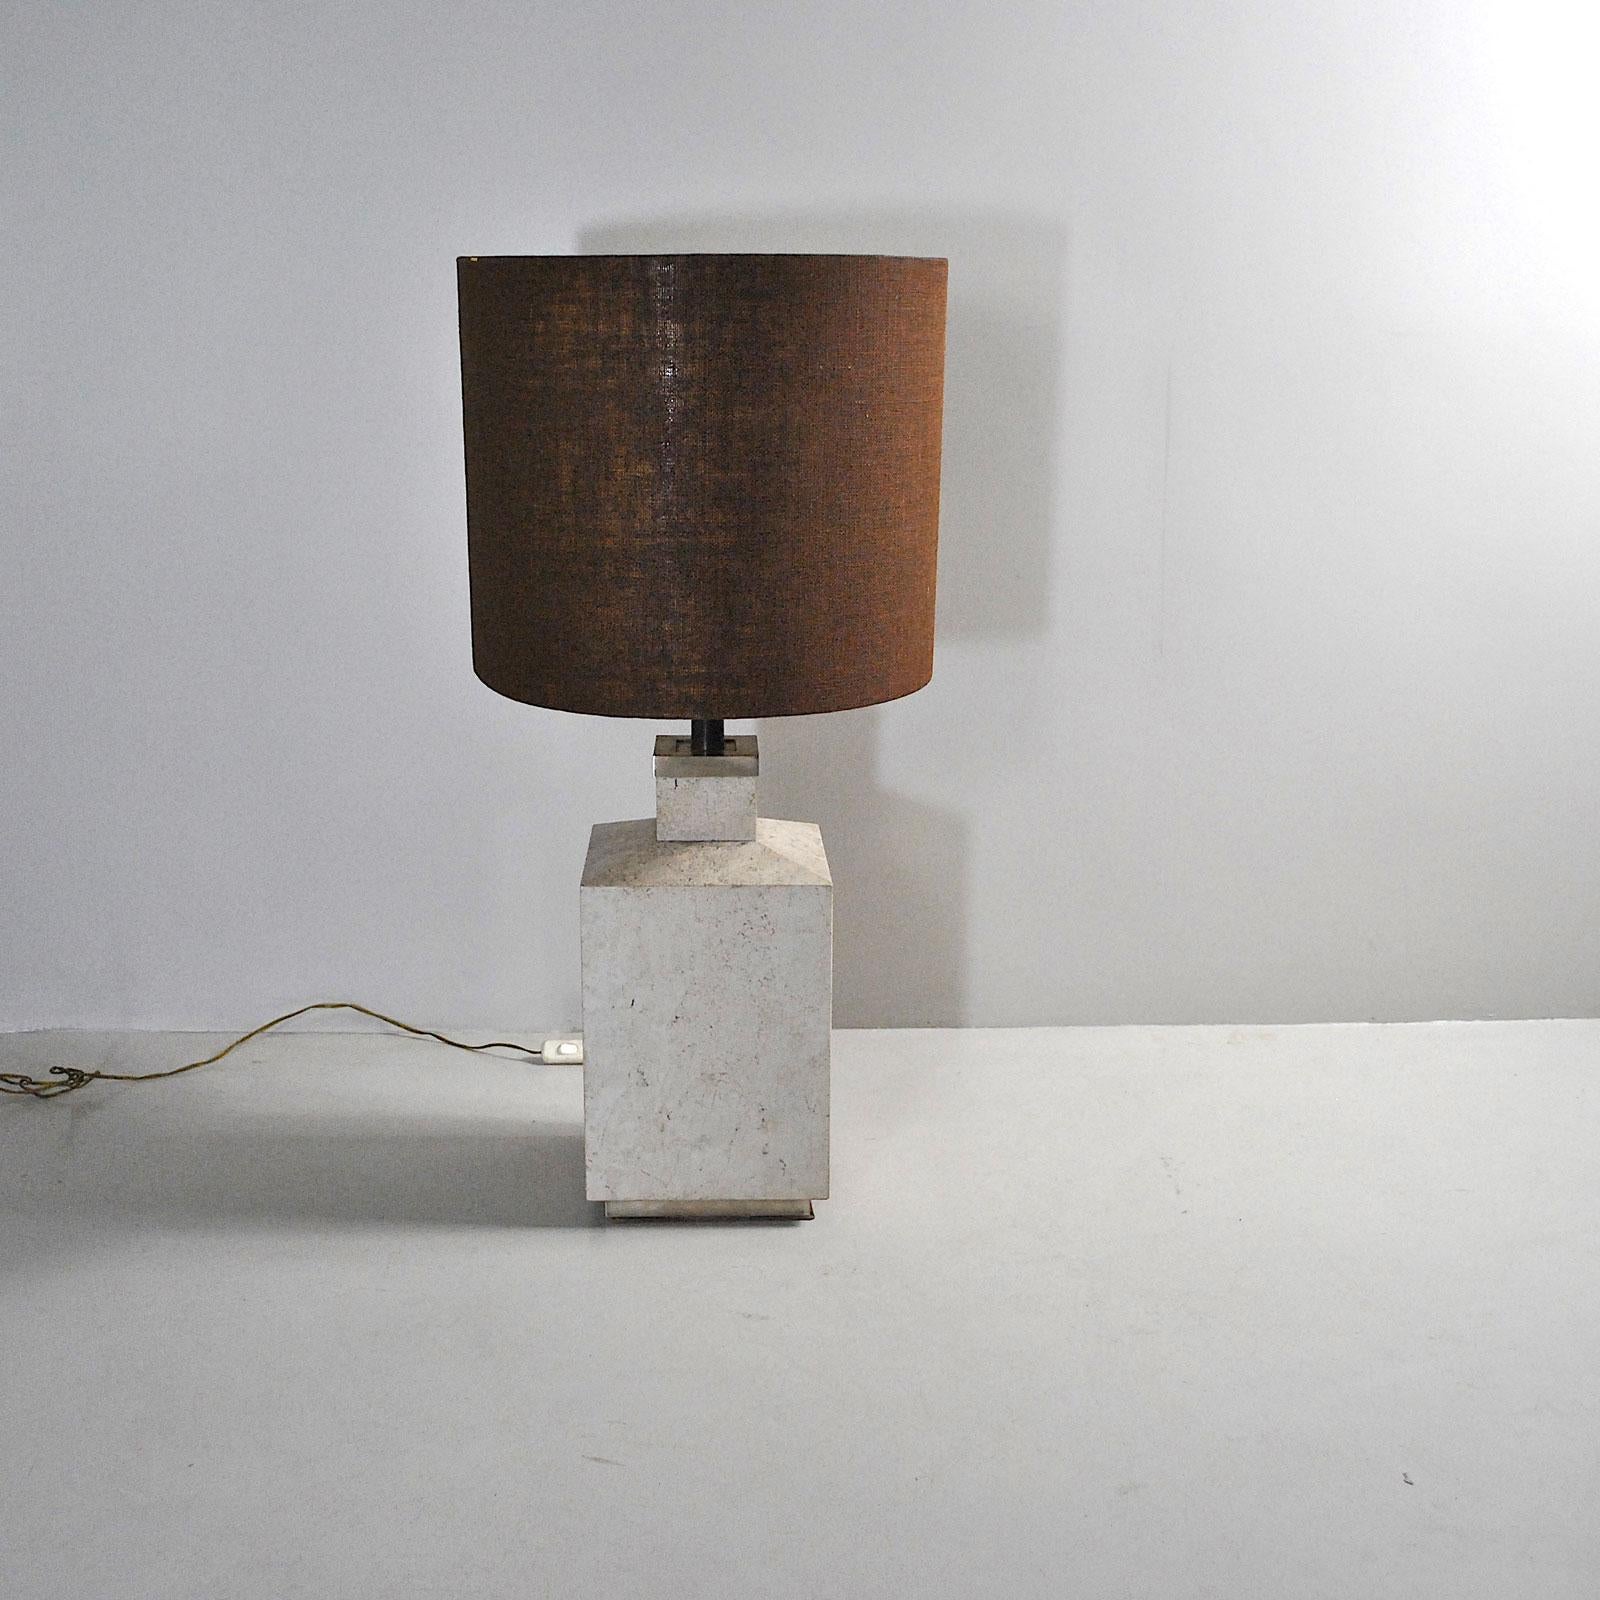 Italian Midcentury Table Lamp Form the 1970s In Good Condition For Sale In bari, IT